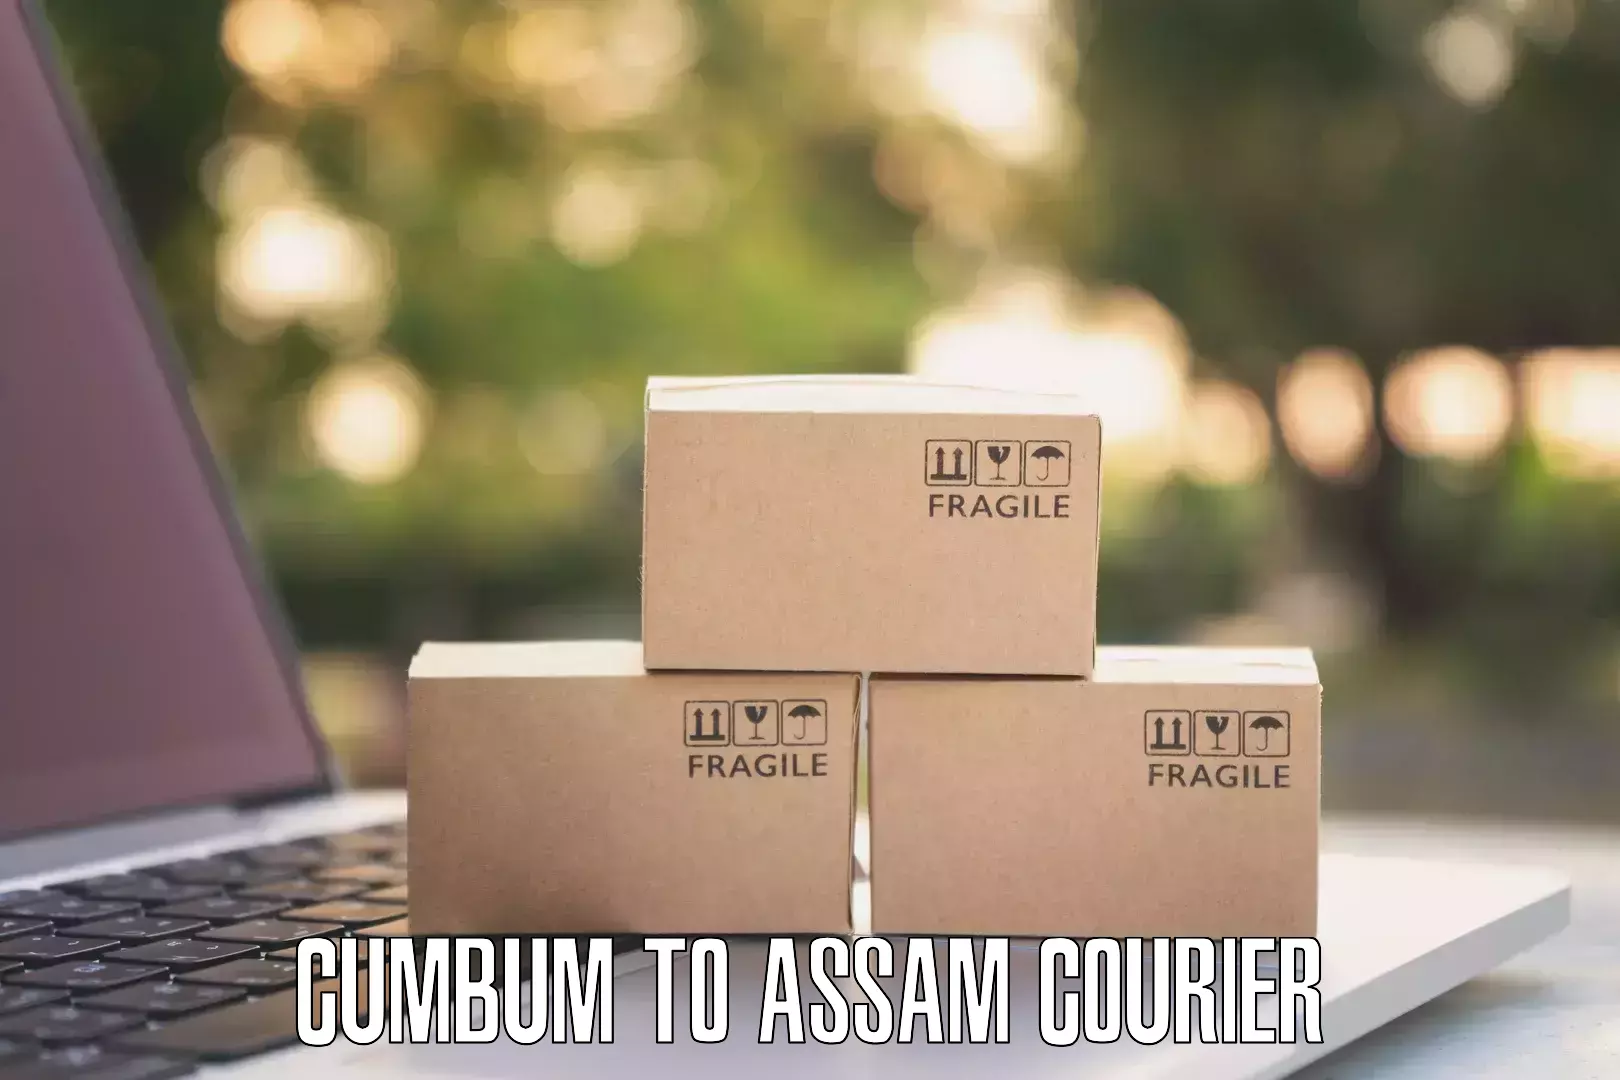 Sustainable shipping practices Cumbum to Assam